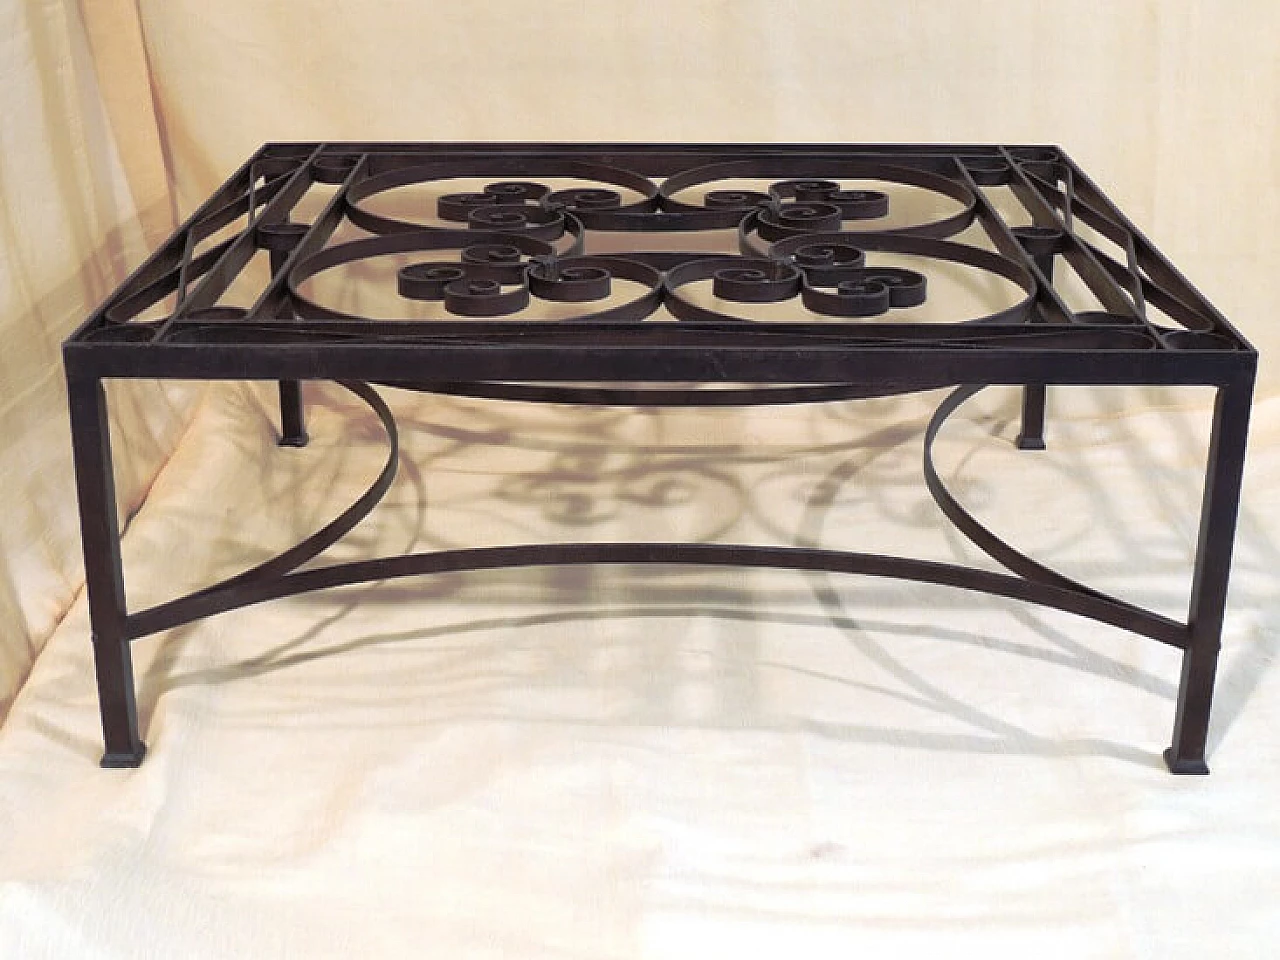 Coffee table created with wrought iron panel from the 1800's 1109443